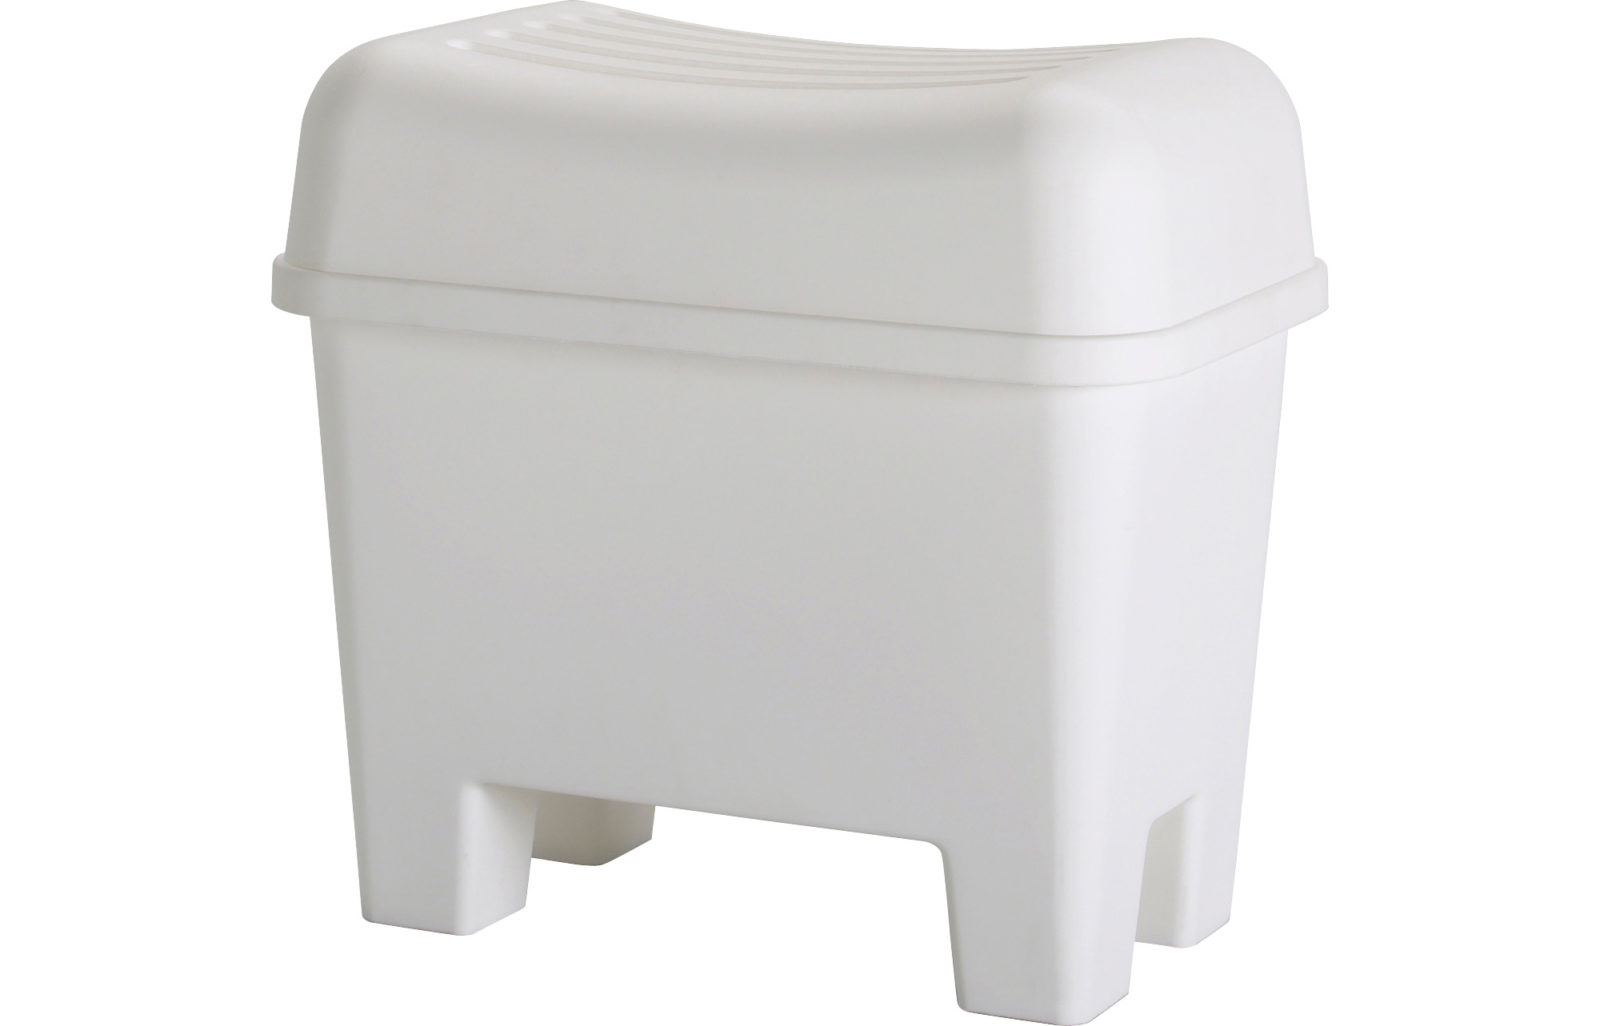 White plastic stool for storage, with a curved lid to sit on, BURSJÖN.